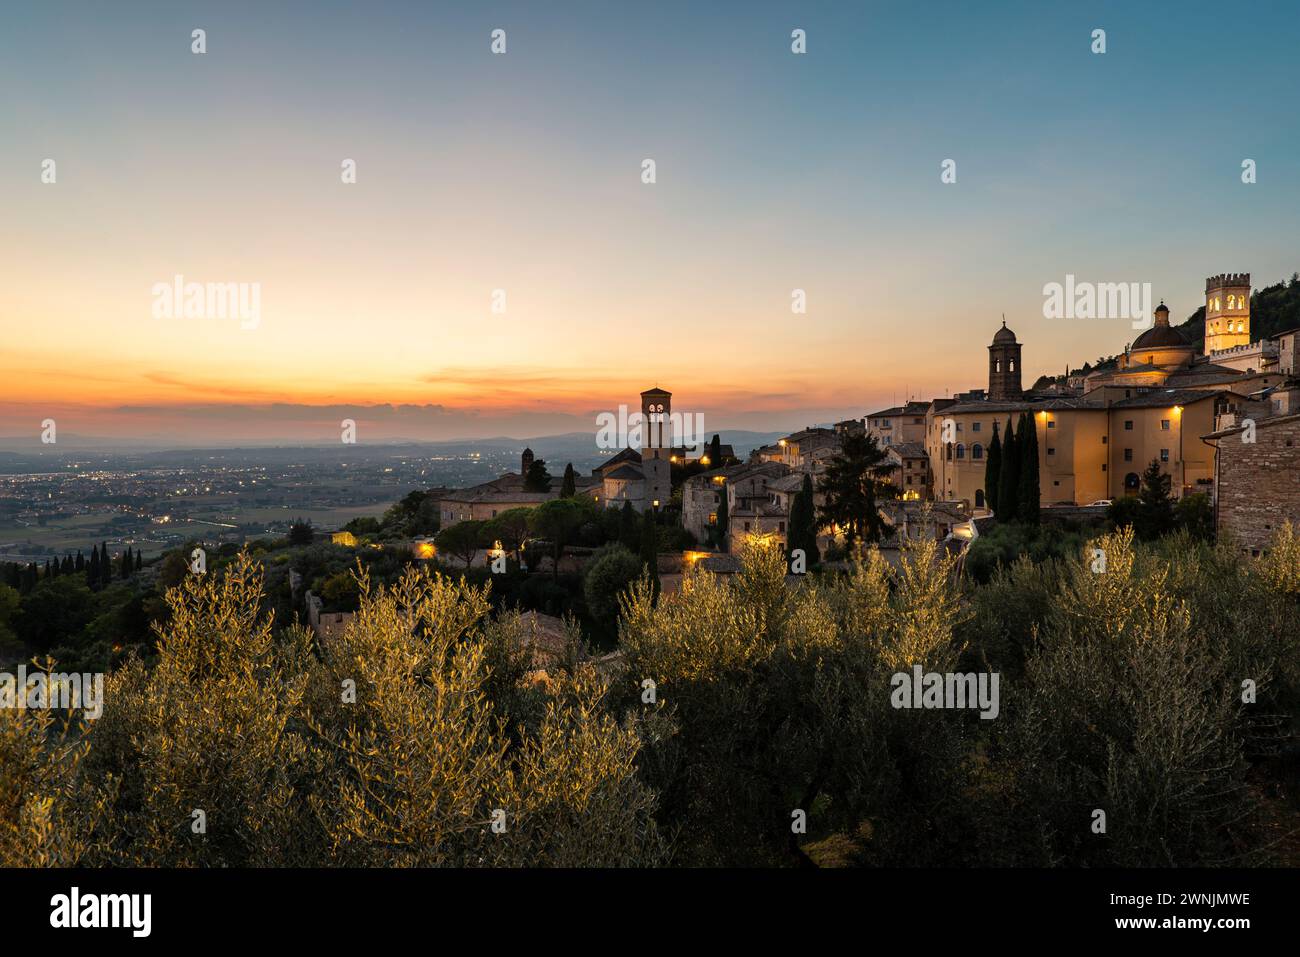 View from Piazza Santa Chiara square of the golden sunset over the Umbra Valley and the old town of Assisi, Umbria, Italy Stock Photo